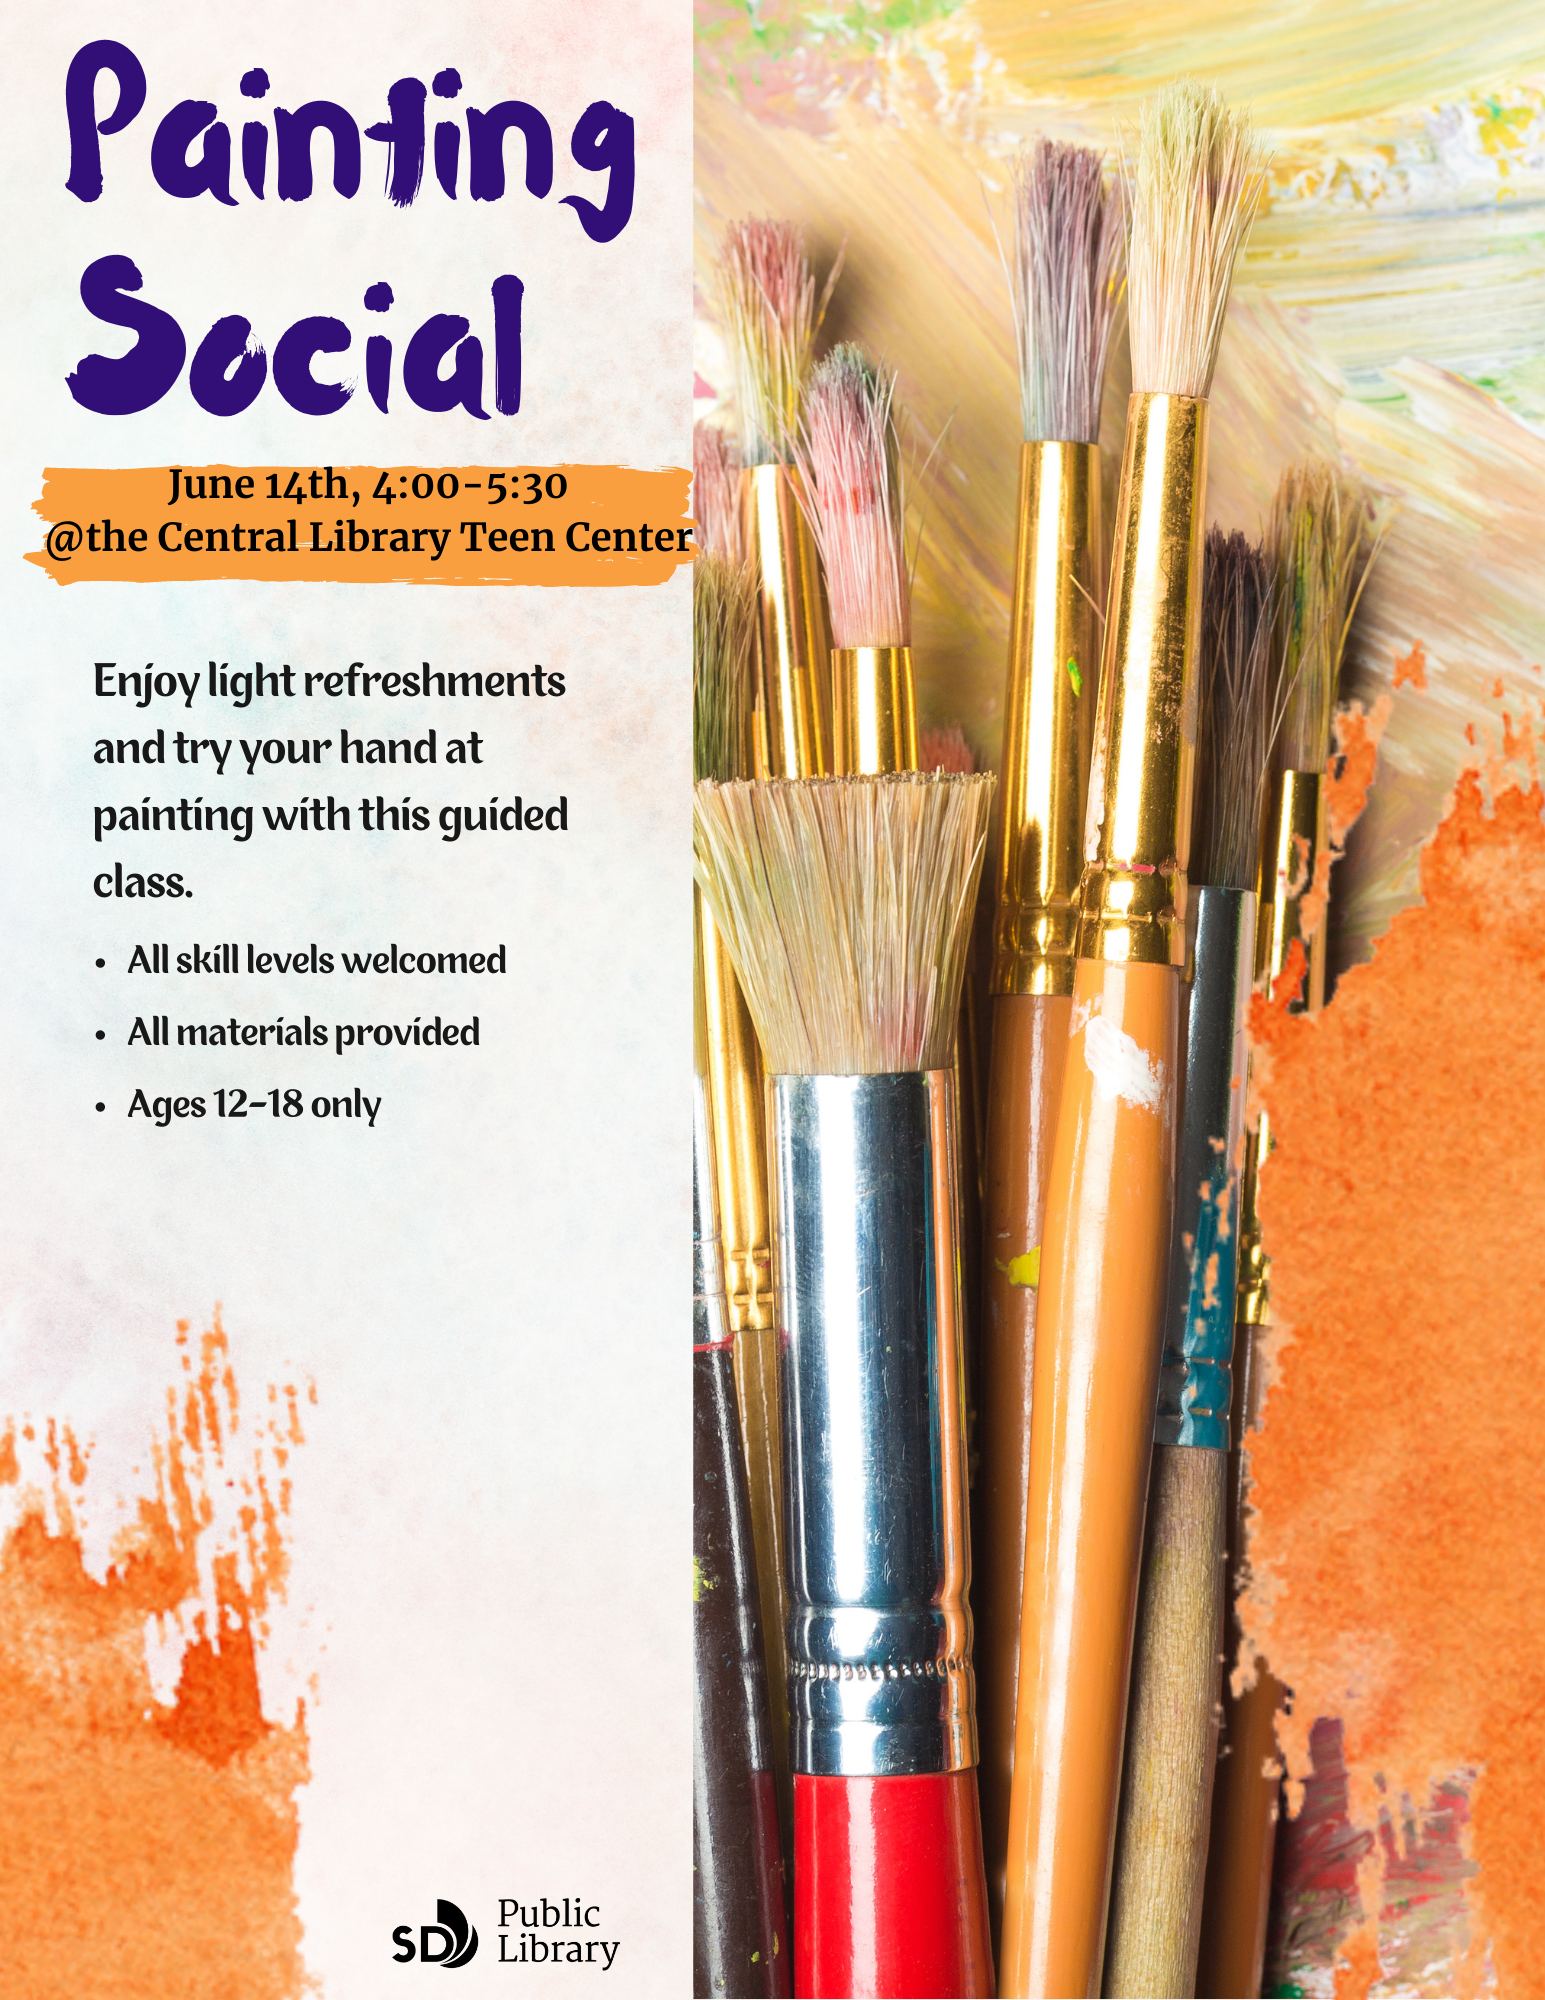 Painting social flyer